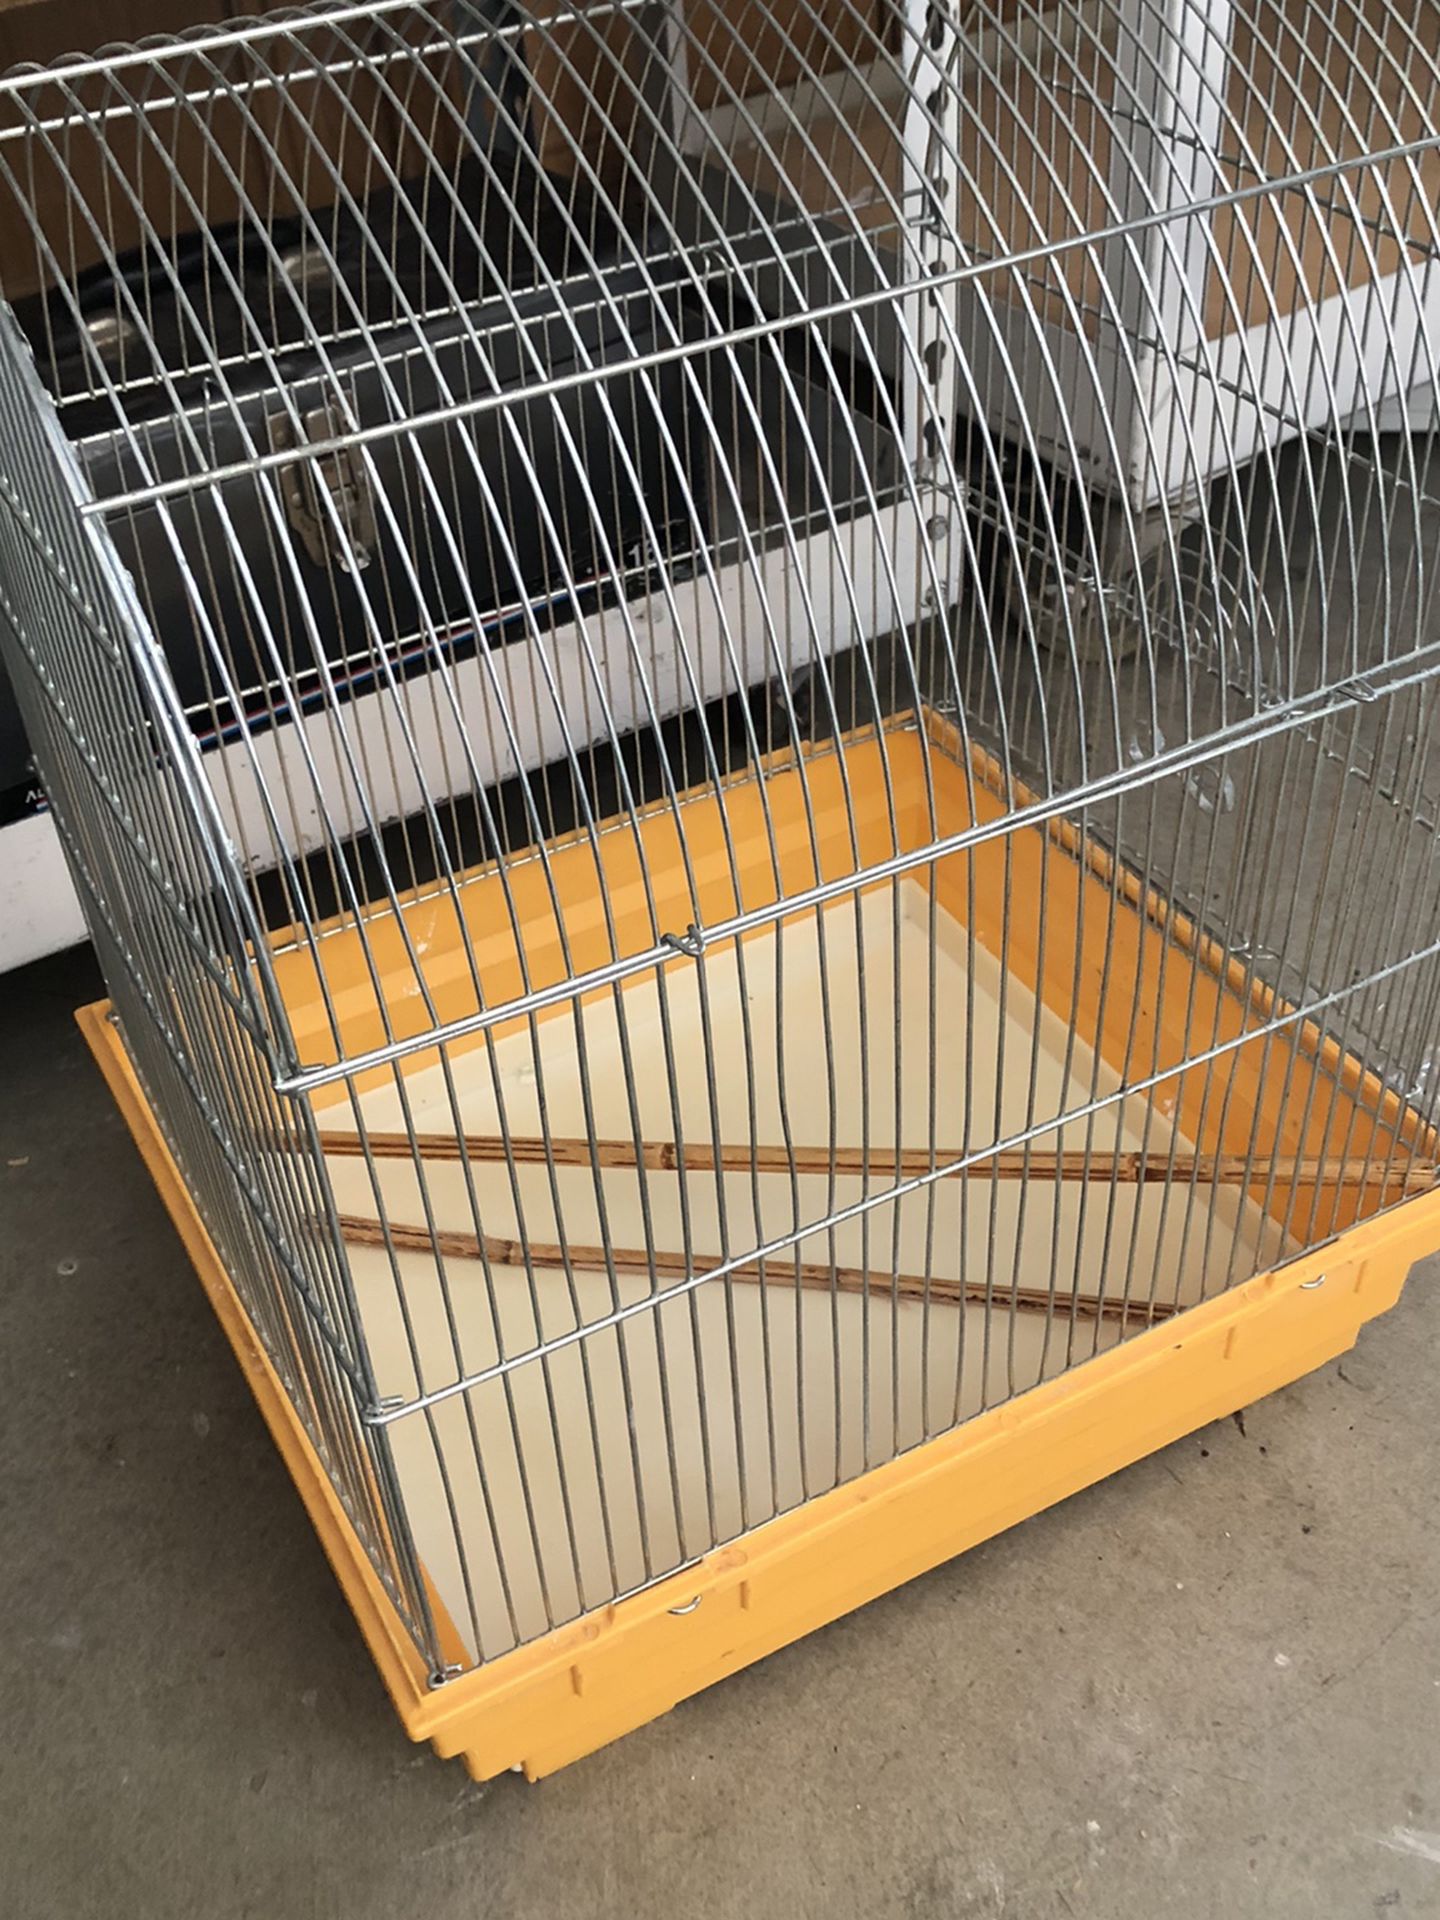 2 Bird Cages For Sale $17